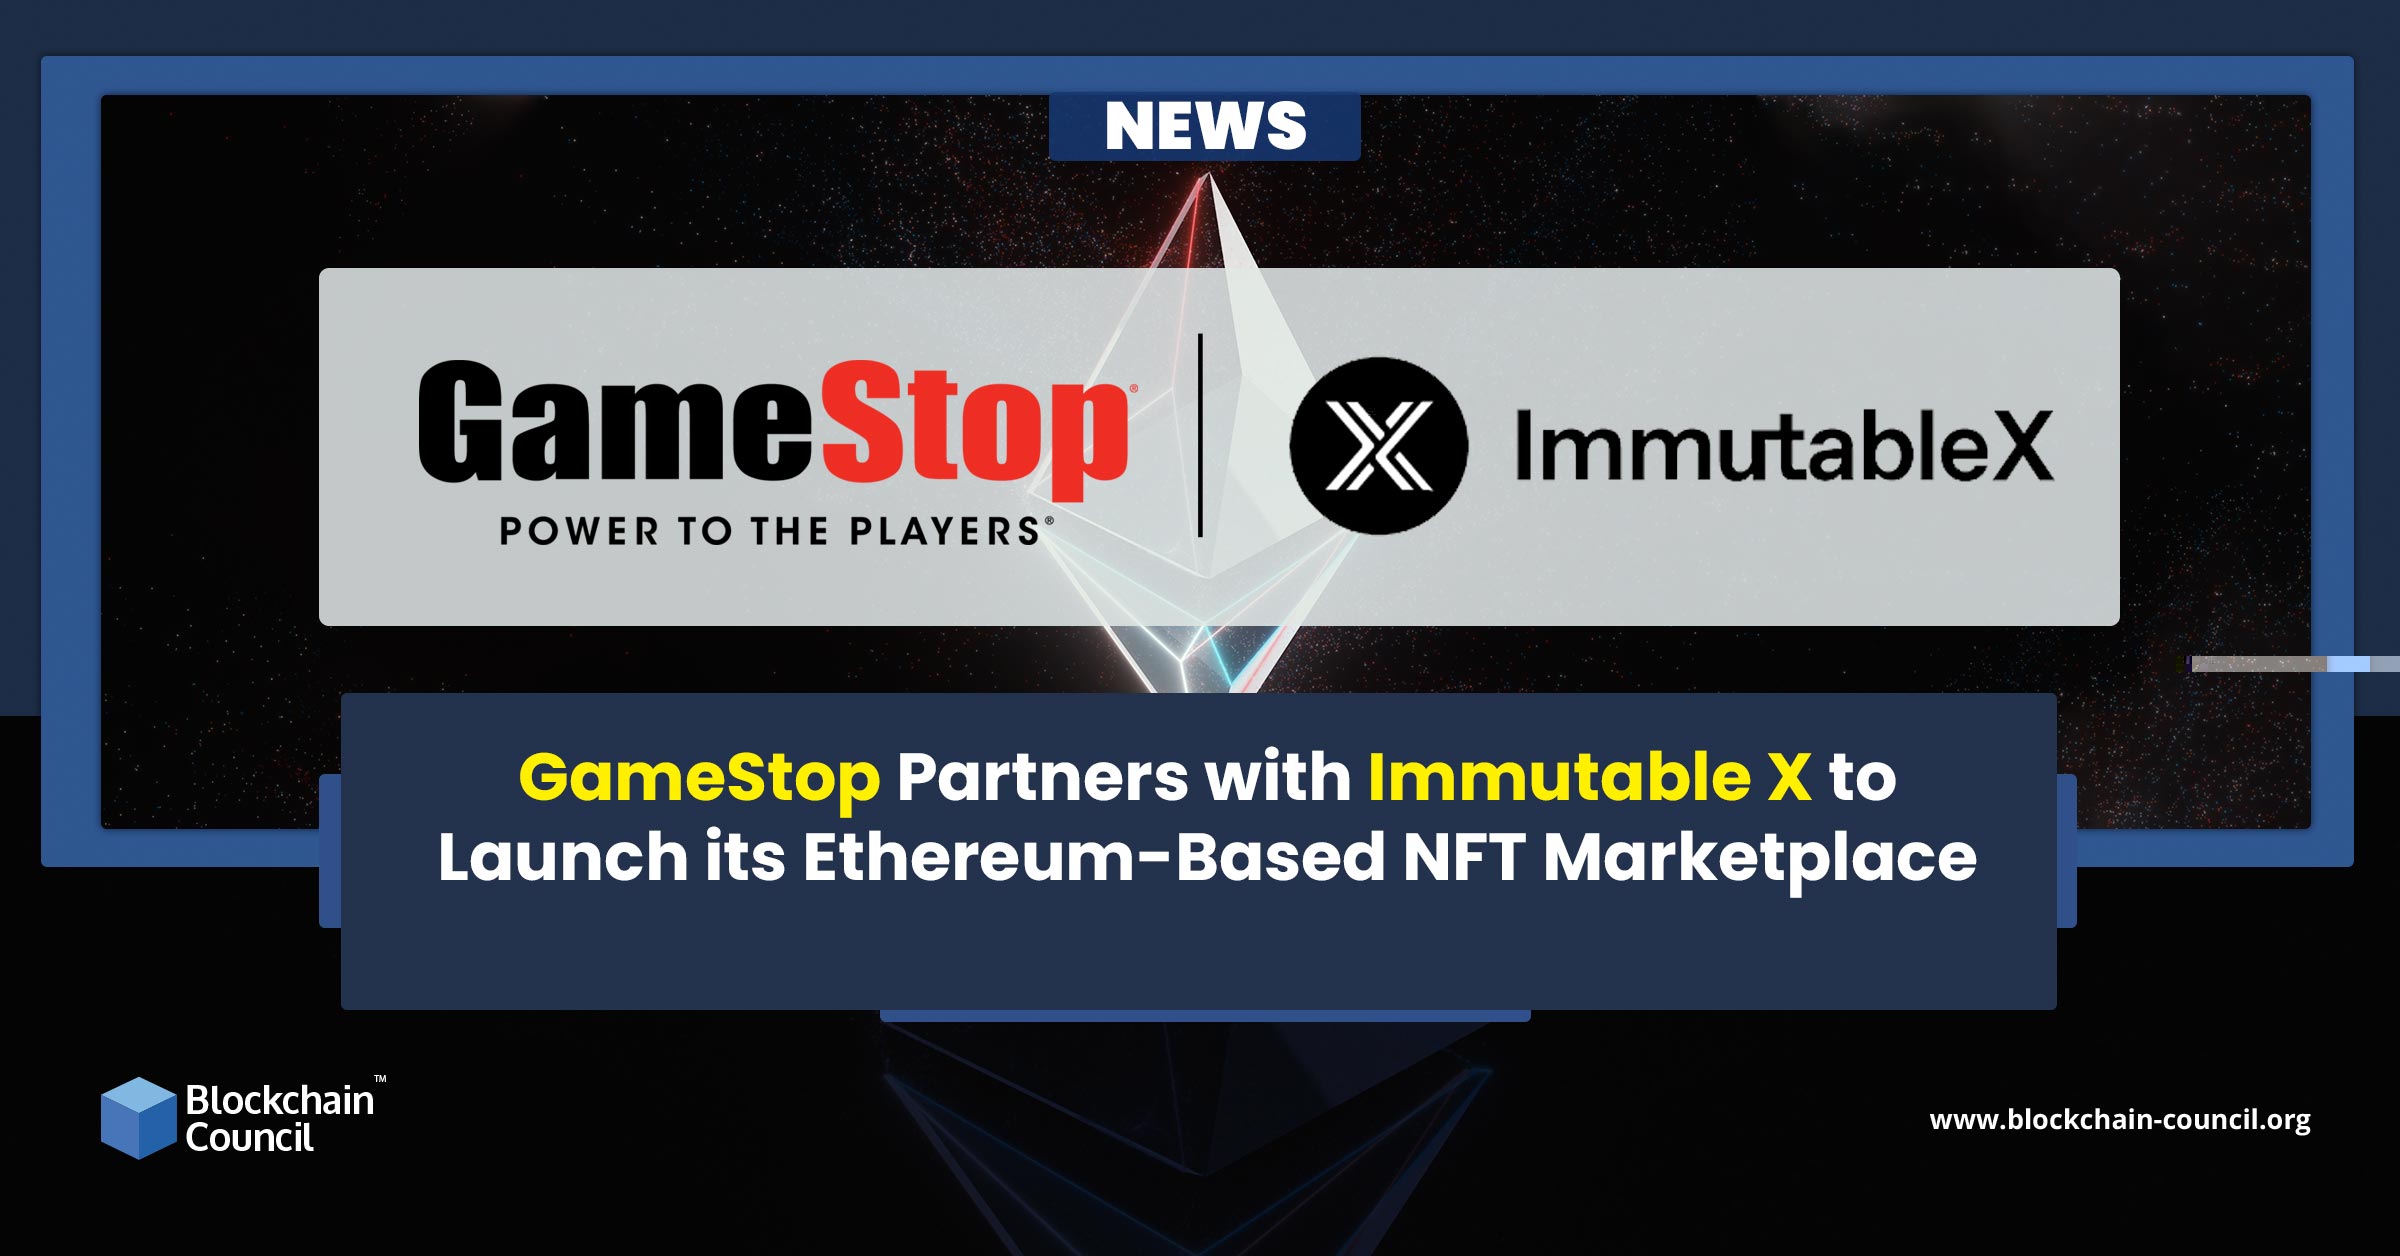 GameStop Partners with Immutable X to Launch its Ethereum-Based NFT Marketplace